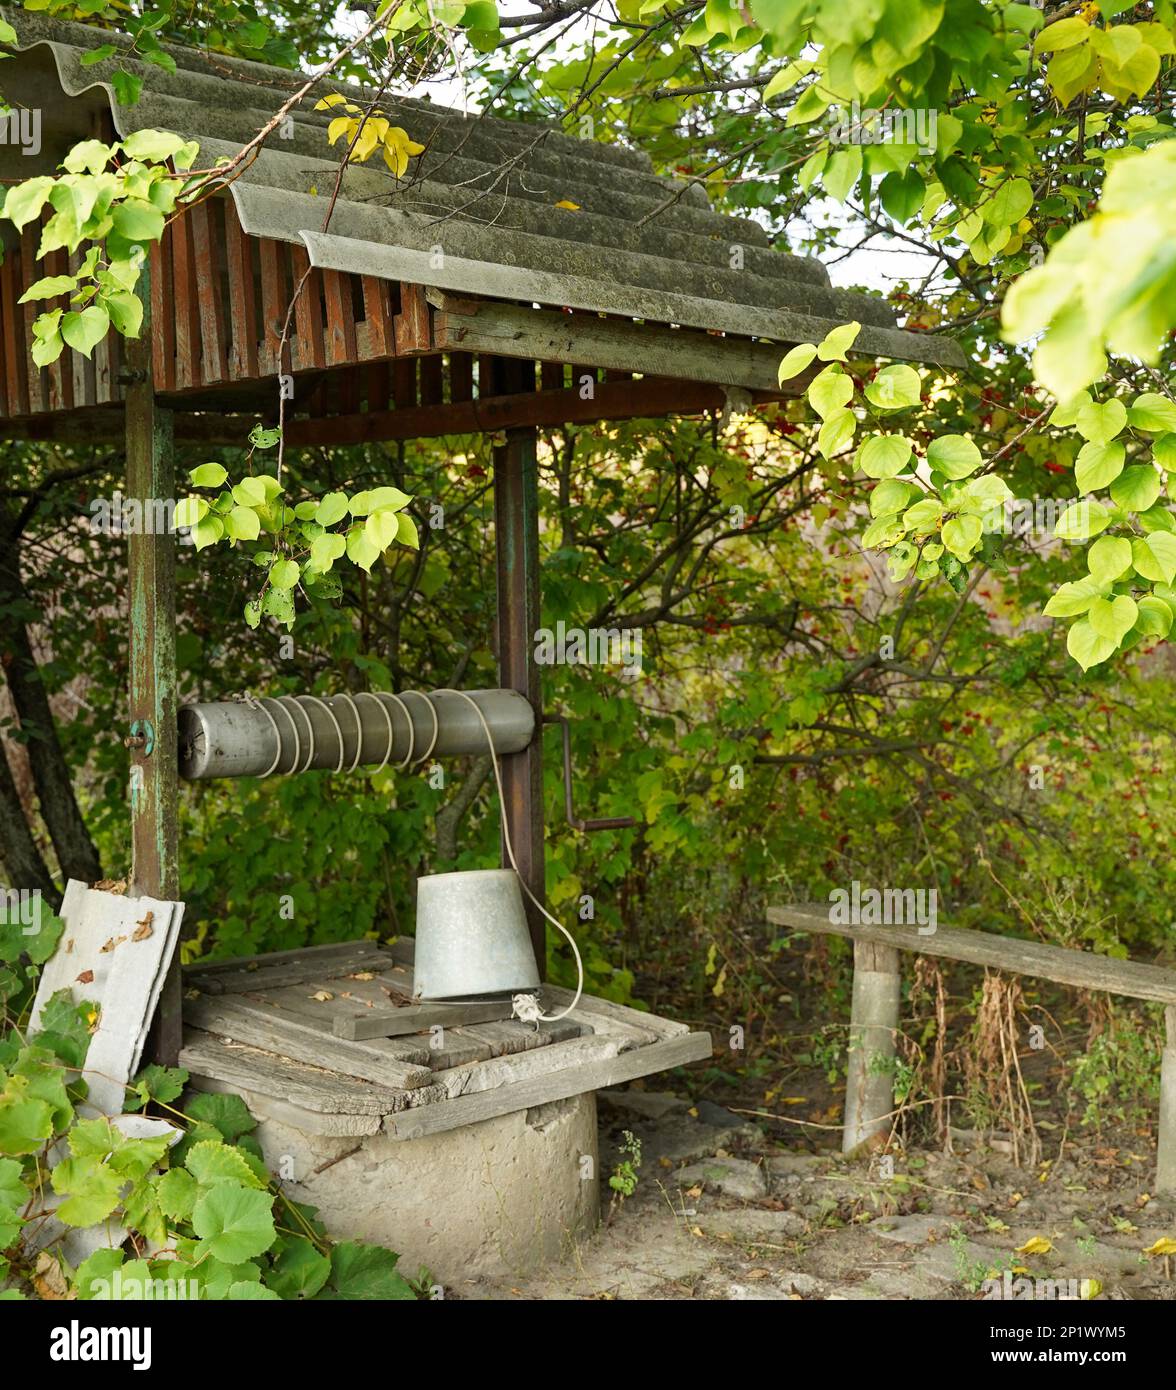 Retro wooden well water in the village. Peaceful scene Stock Photo